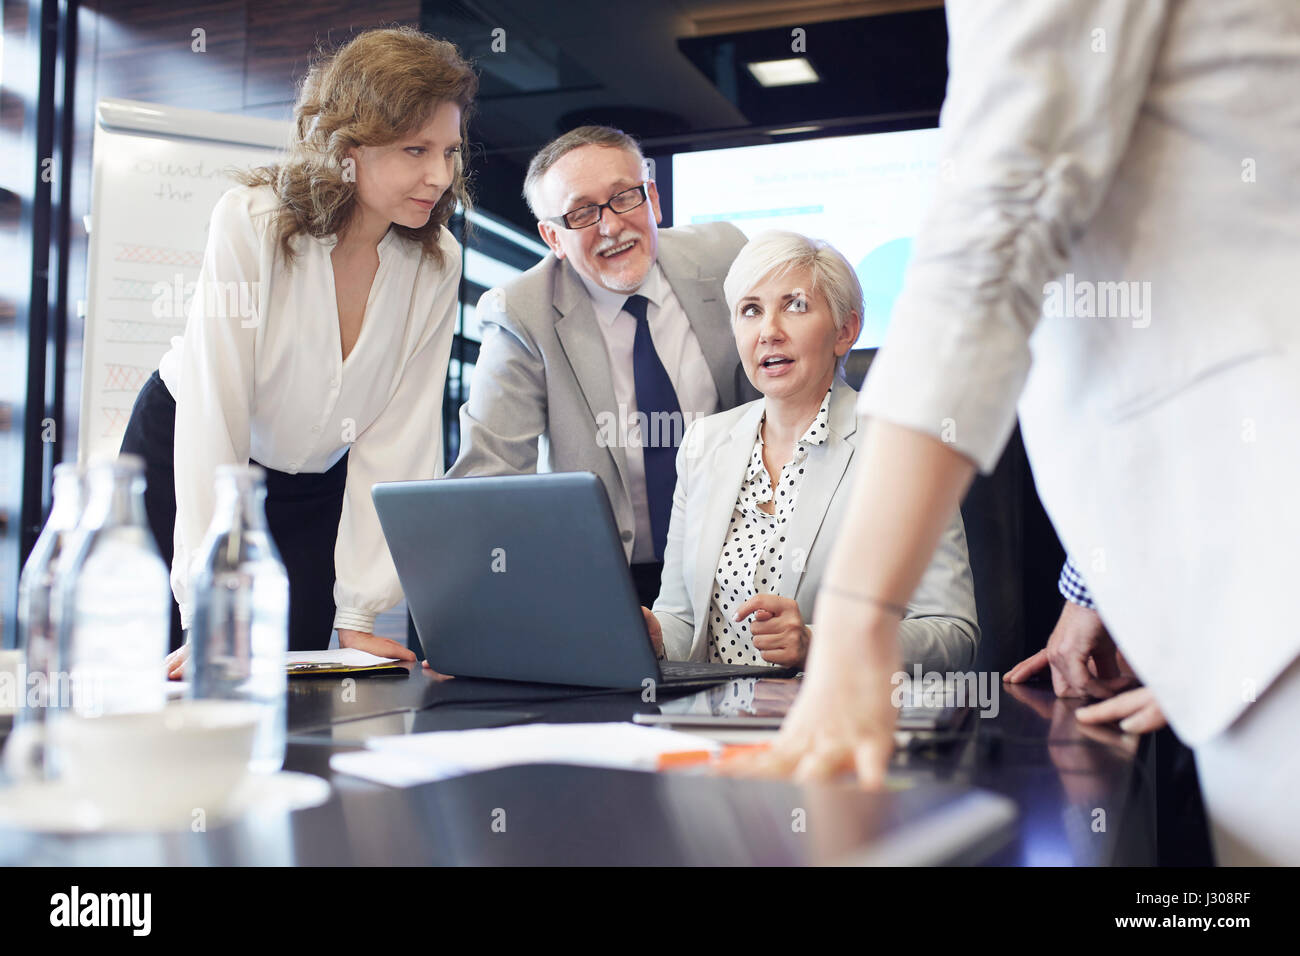 Female coworker taking advantage of this opportunity Stock Photo